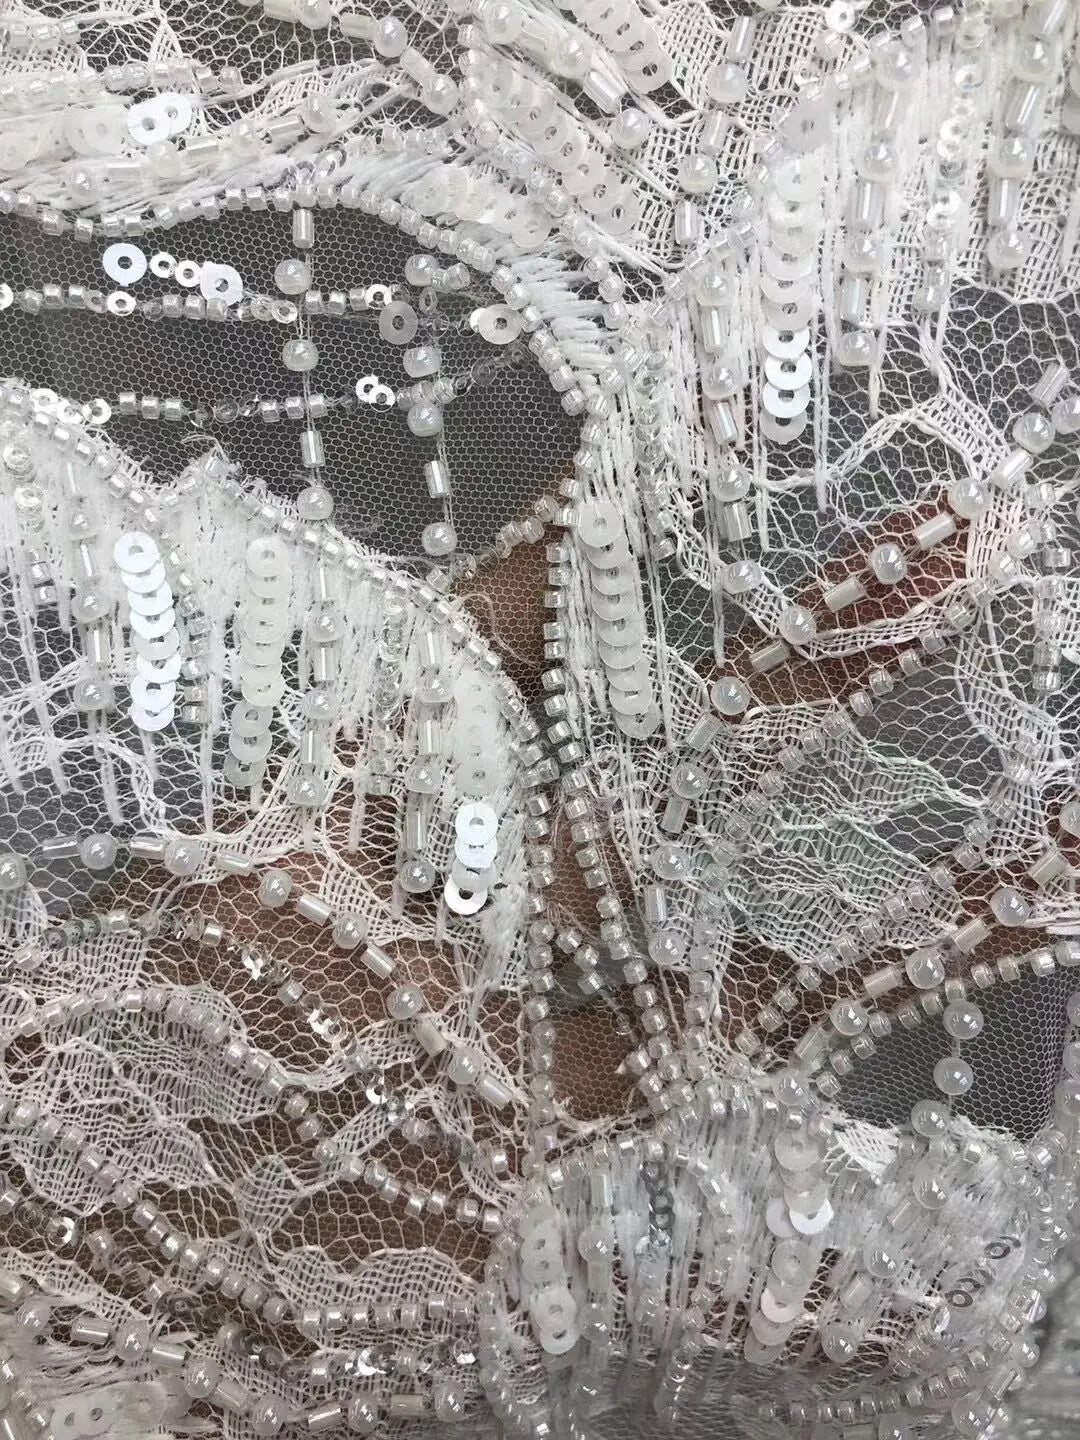 5 YARDS / Islae Fur Sequin Abstract Beaded Embroidery Tulle Mesh Lace Dress Fabric